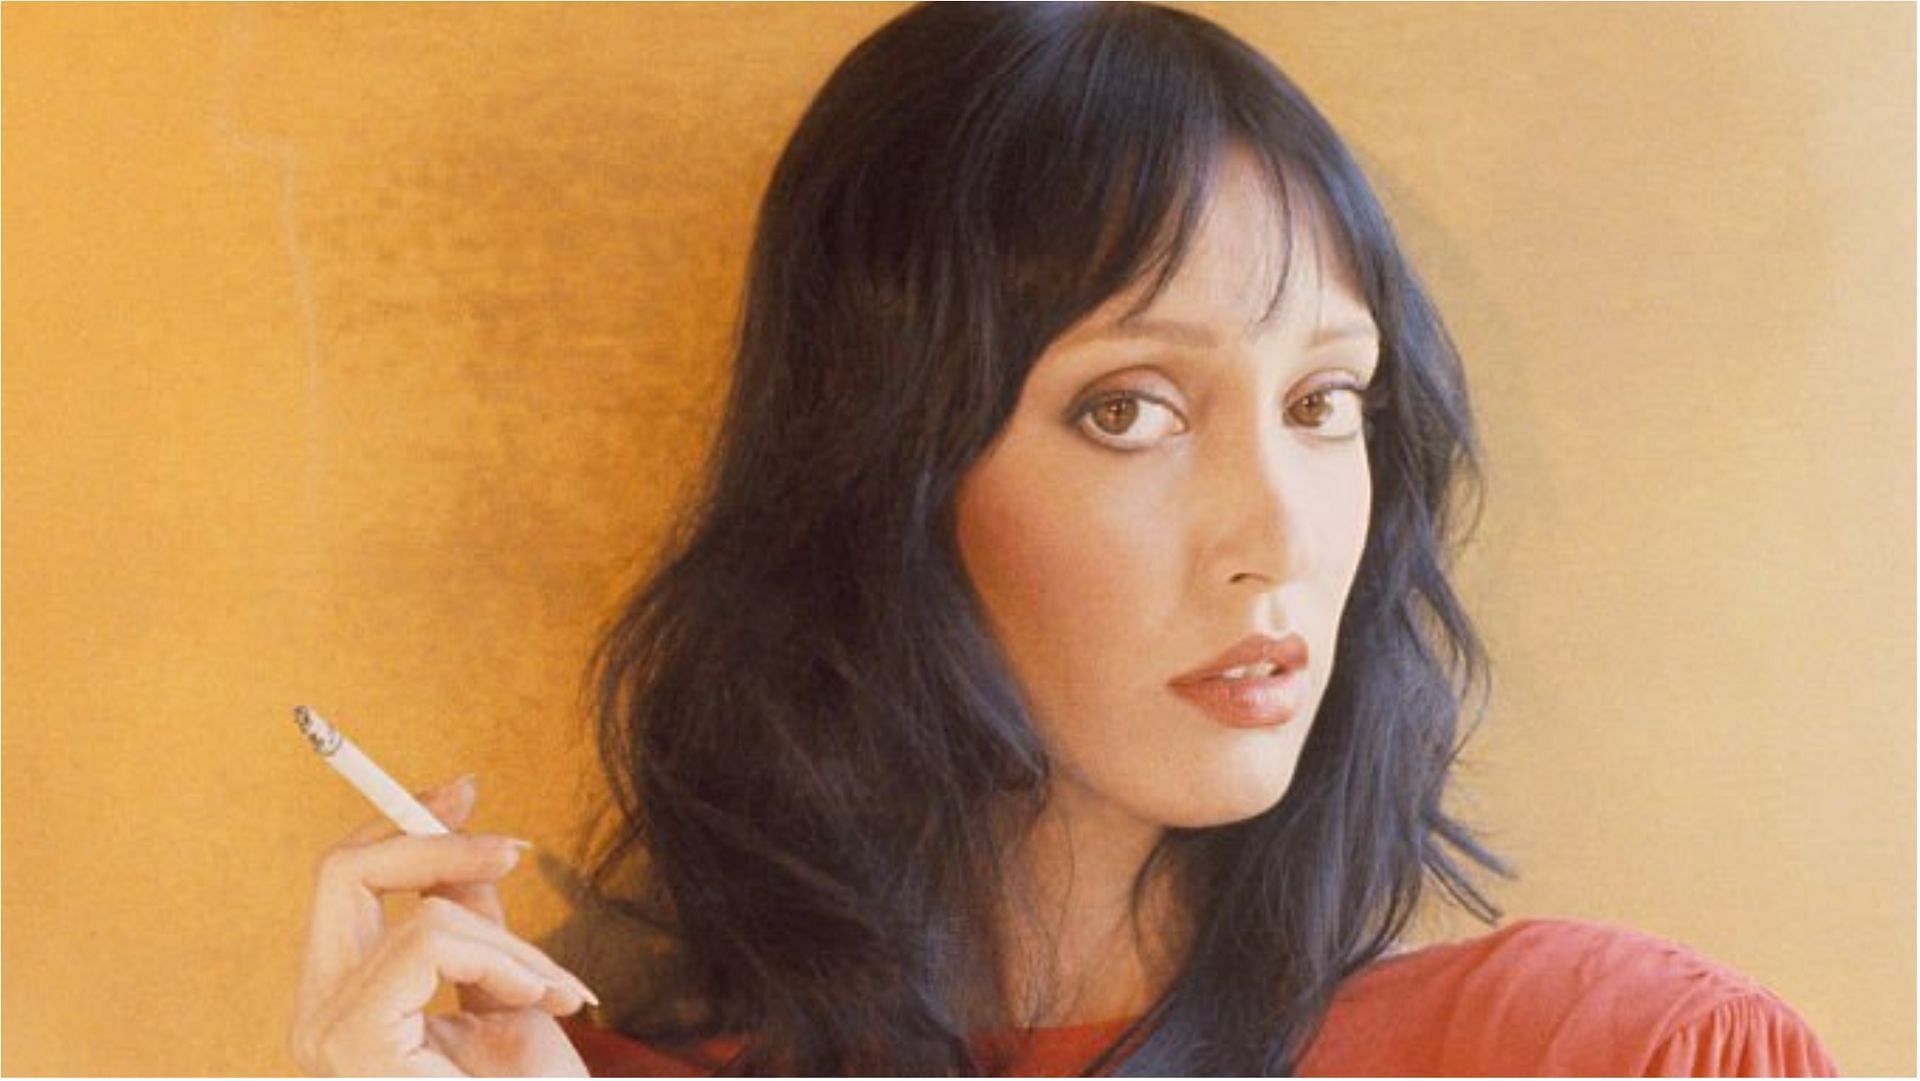 Shelley Duvall earned a lot from her work in the entertainment industry (Image via Michael Childers/Getty Images)